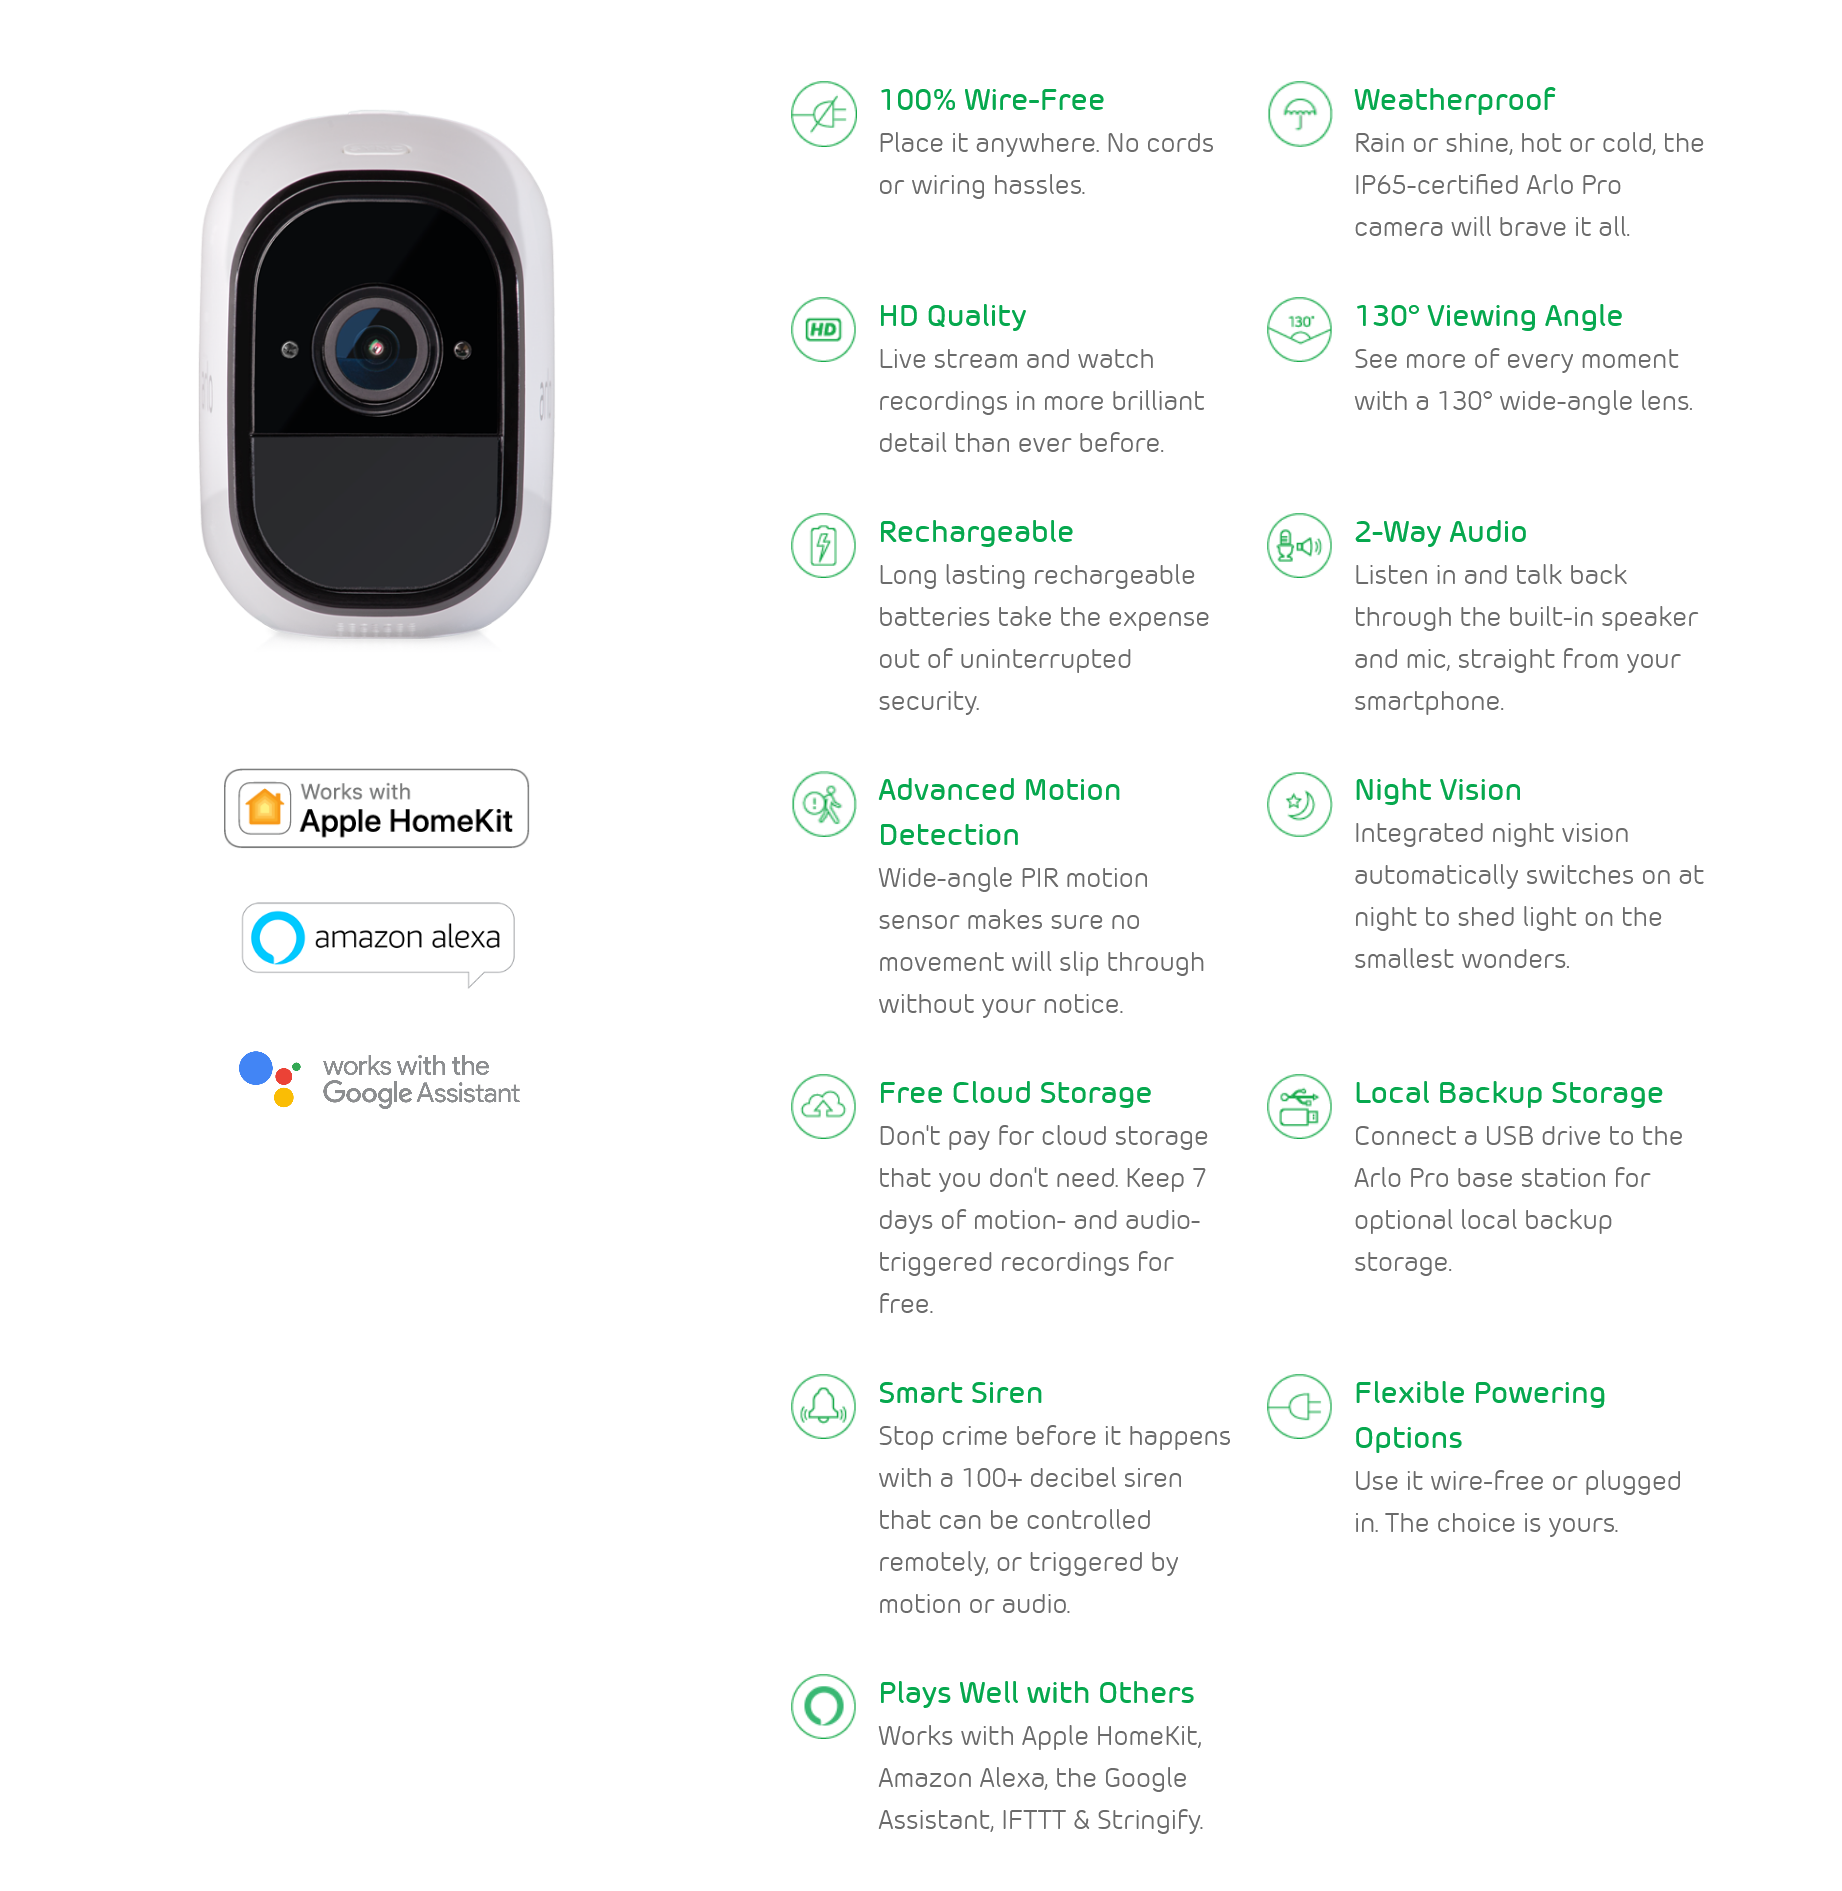 Arlo Pro VMS4430 Smart Security System VMS4430-100AUS Smart Features